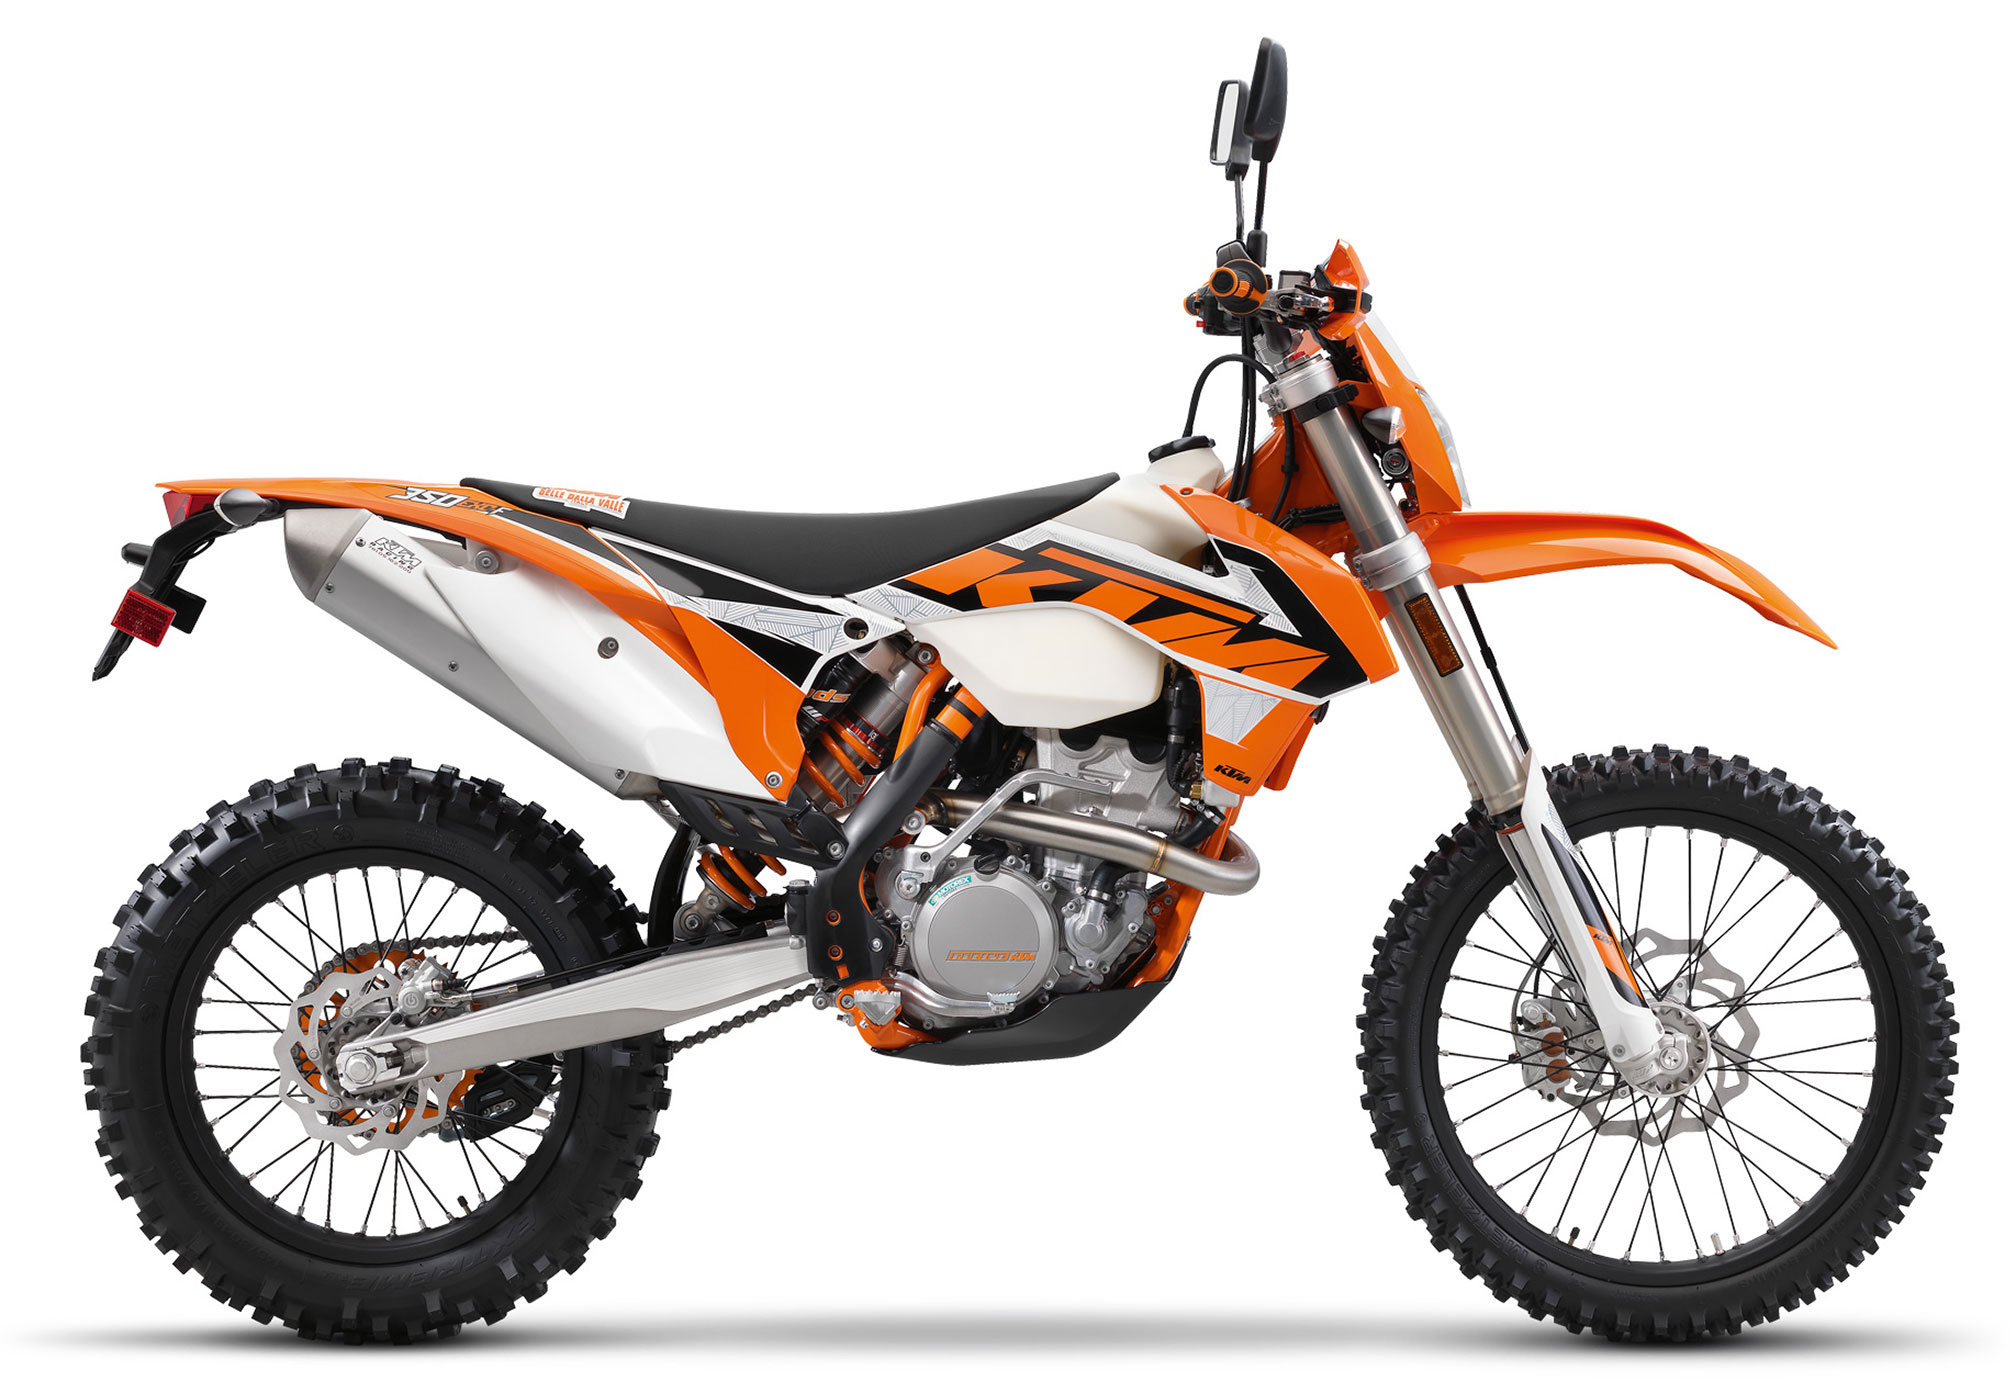 2016 ktm 300 exc review